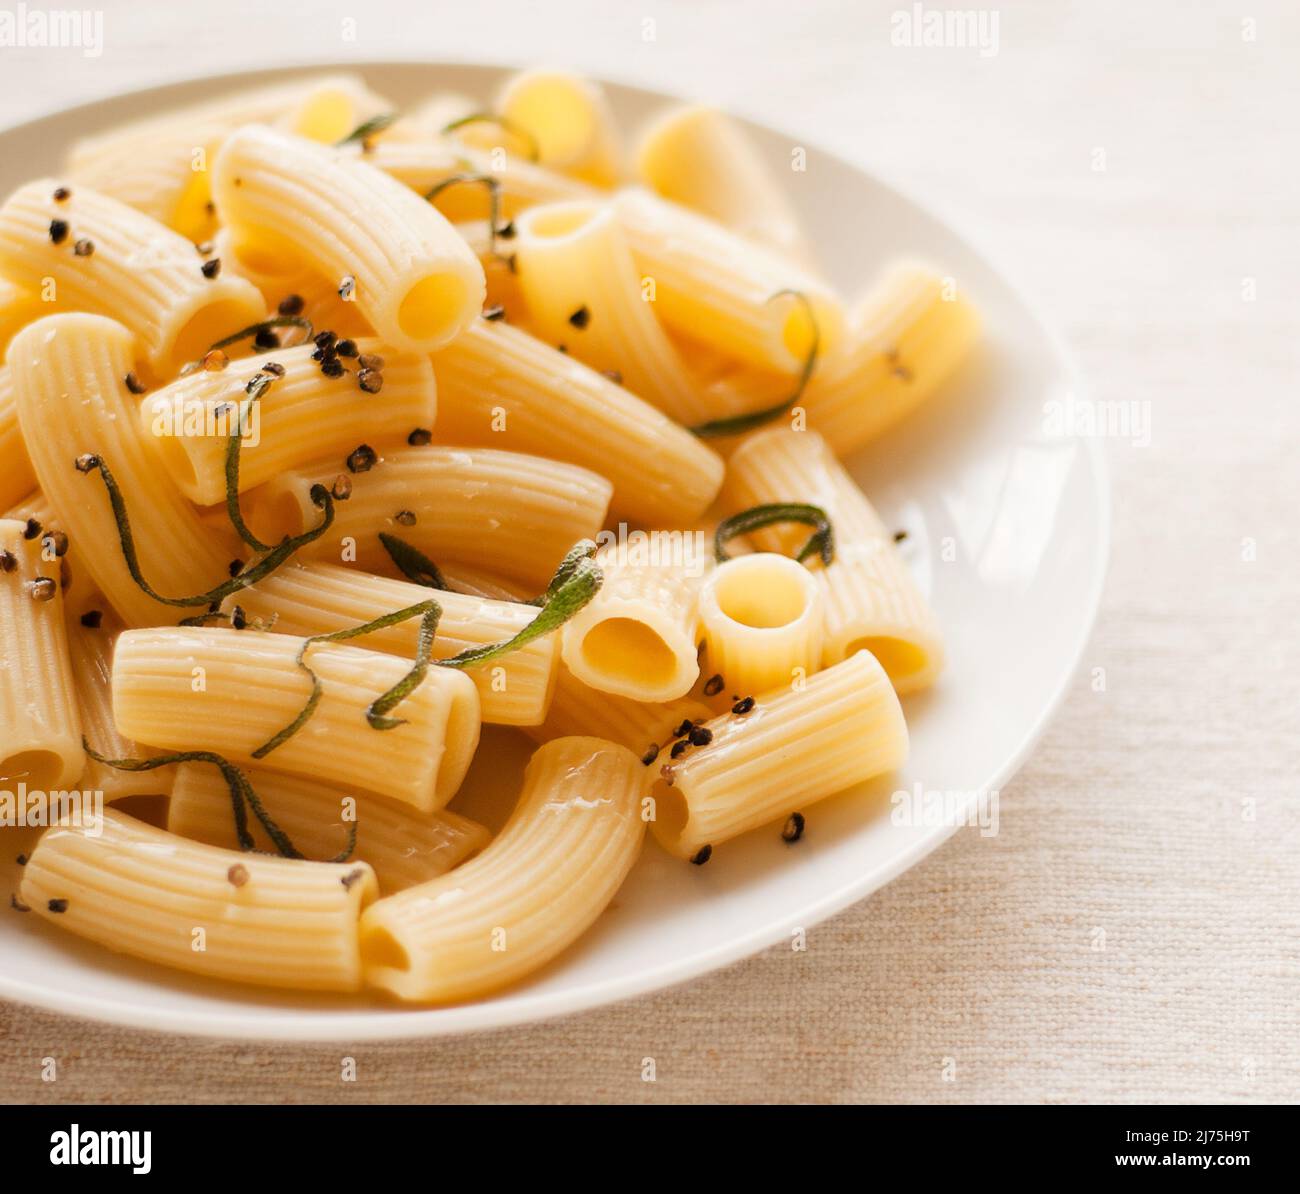 Rigatoni Tossed with Olive Oil, Pepper and Fresh Herbs Stock Photo